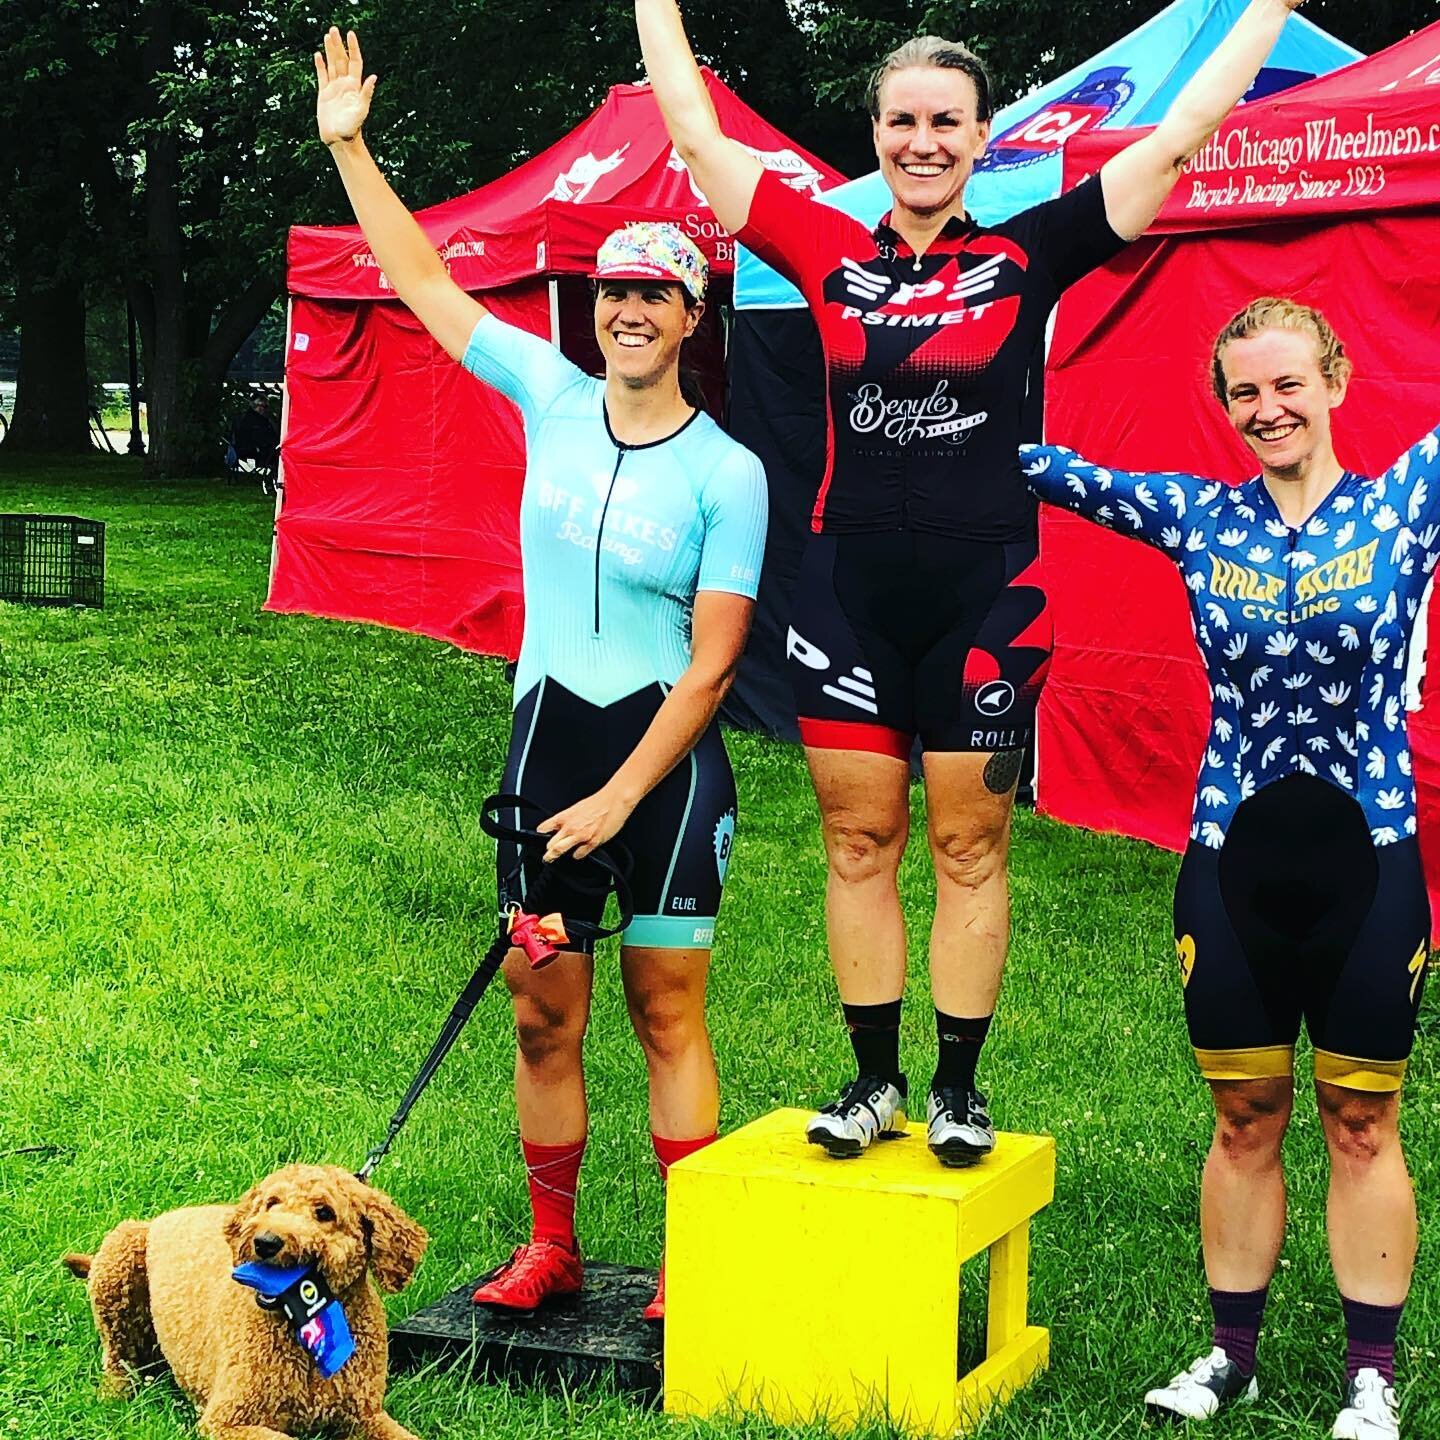 We are super proud of STKD rider Kelly who took second place 🥈 in the category 3 Illinois crit championship this weekend racing with her home team. It was a fast race finished off with a pretty magical sprint. Nice work, Kelly! We hope Clarke enjoye